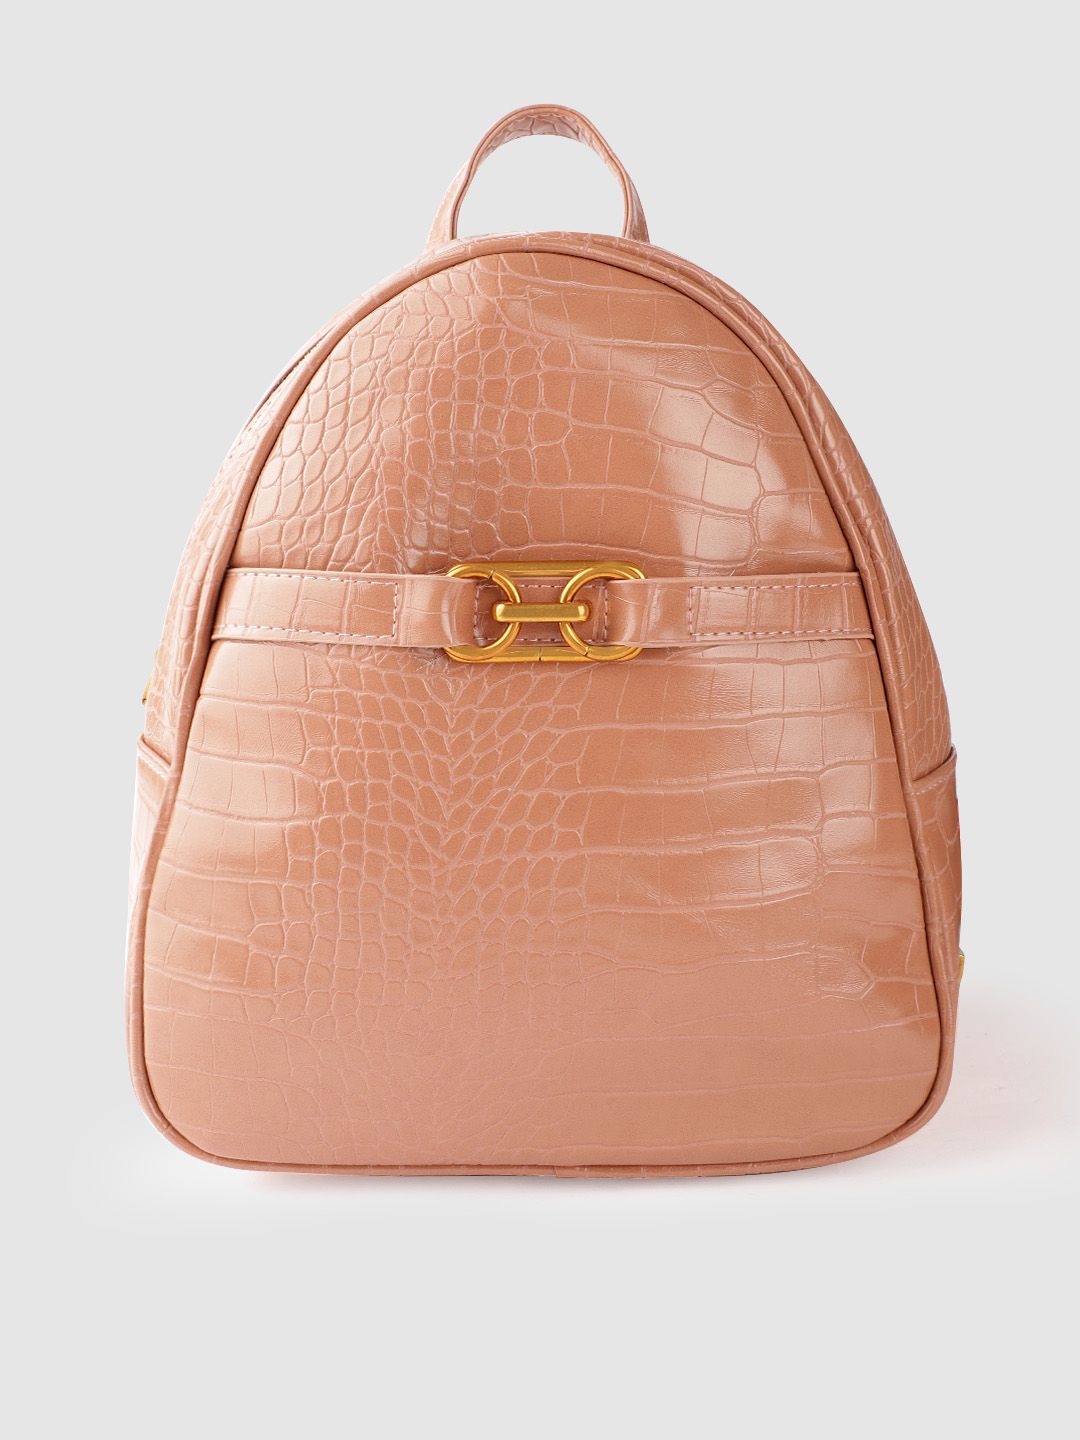 Mast & Harbour Women Peach-Coloured Croc-Textured Backpack Price in India